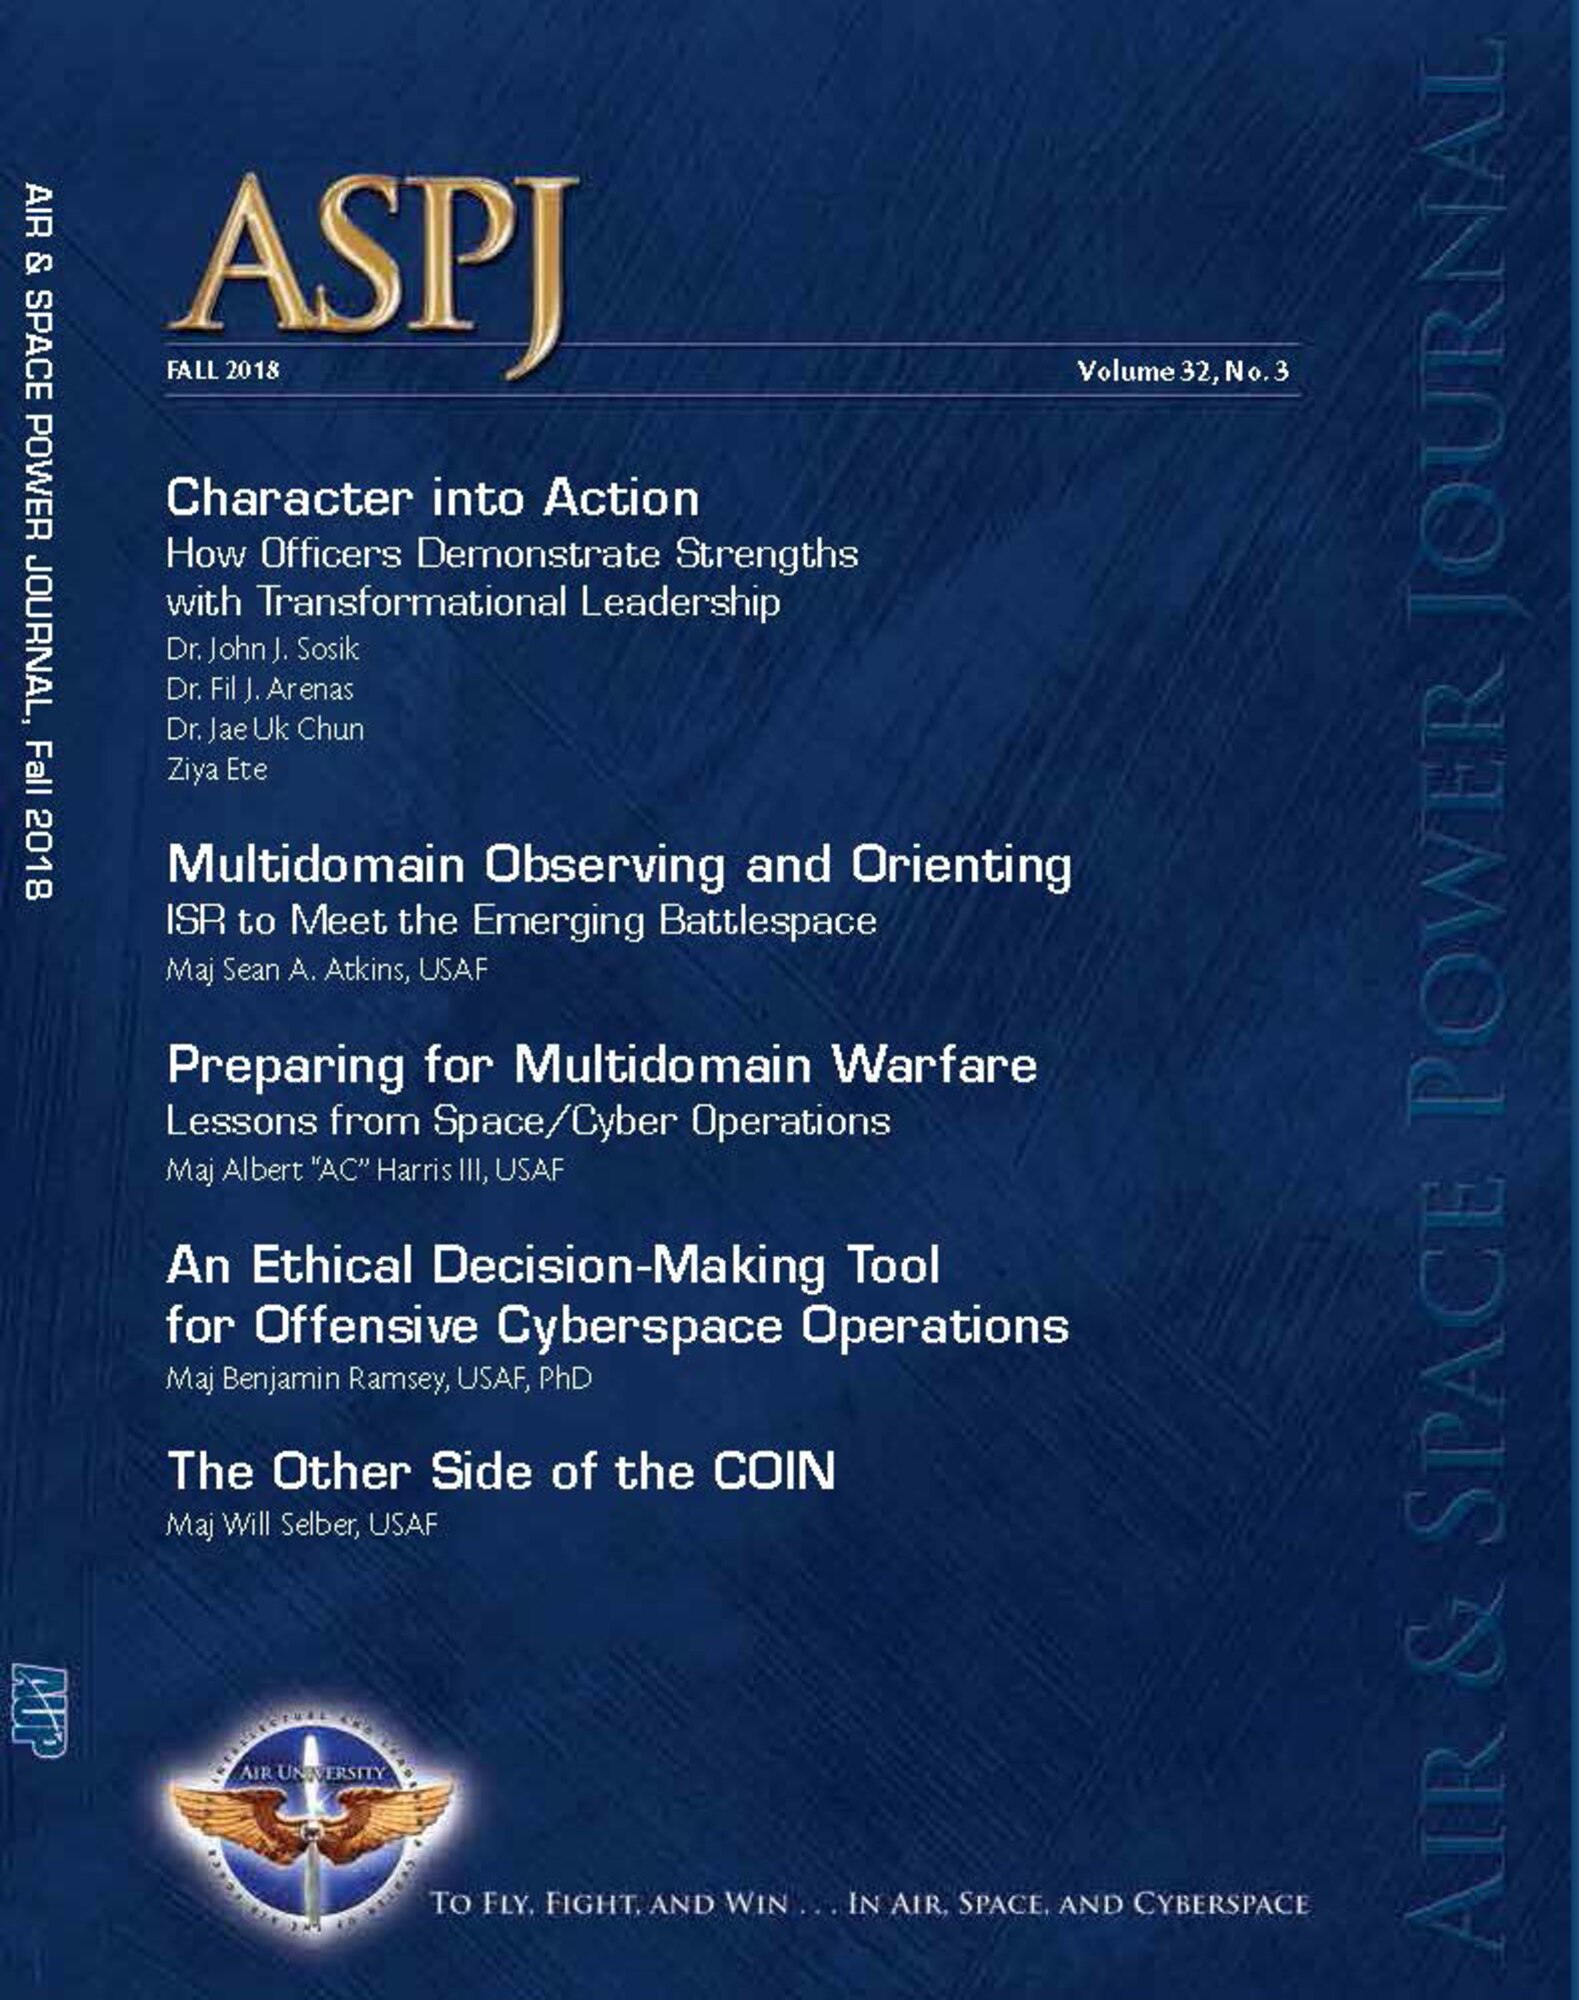 The Fall 2018 Air and Space Power Journal, published by Air University Press, is available at https://www.airuniversity.af.mil/ASPJ//. (Courtesy Photo)